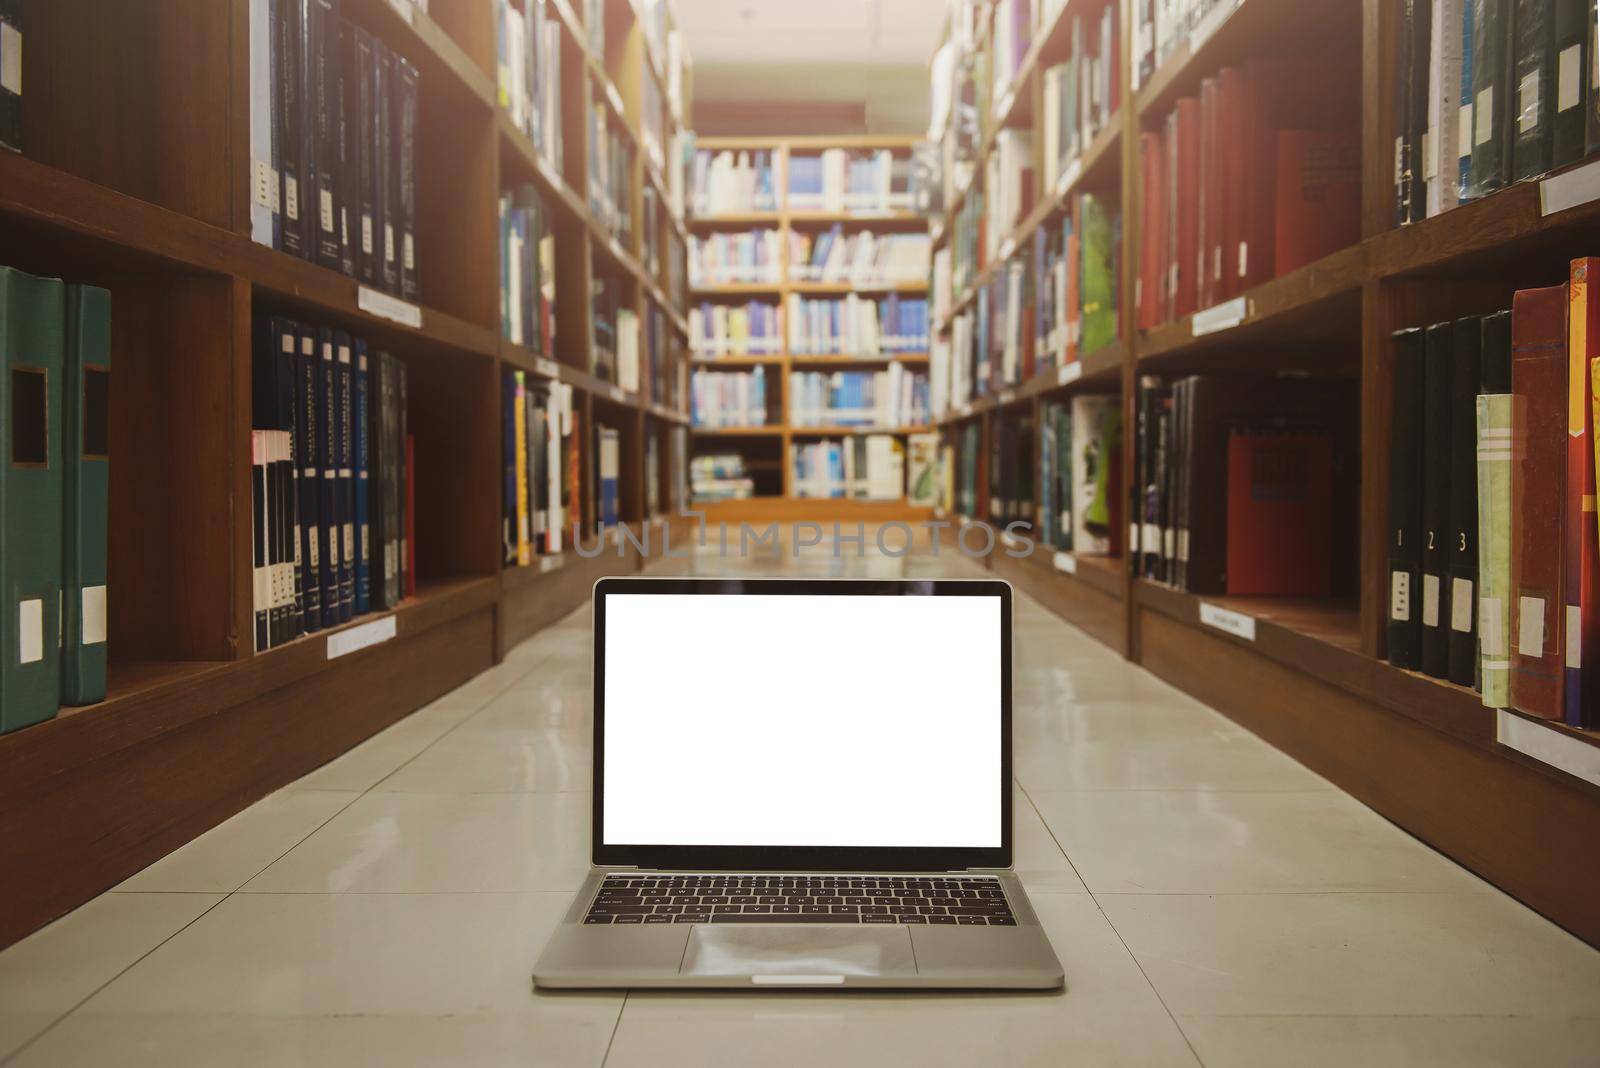 Laptop with blank screen on floor. interior background, bookshelf, library.Educational technology concept. by thanumporn